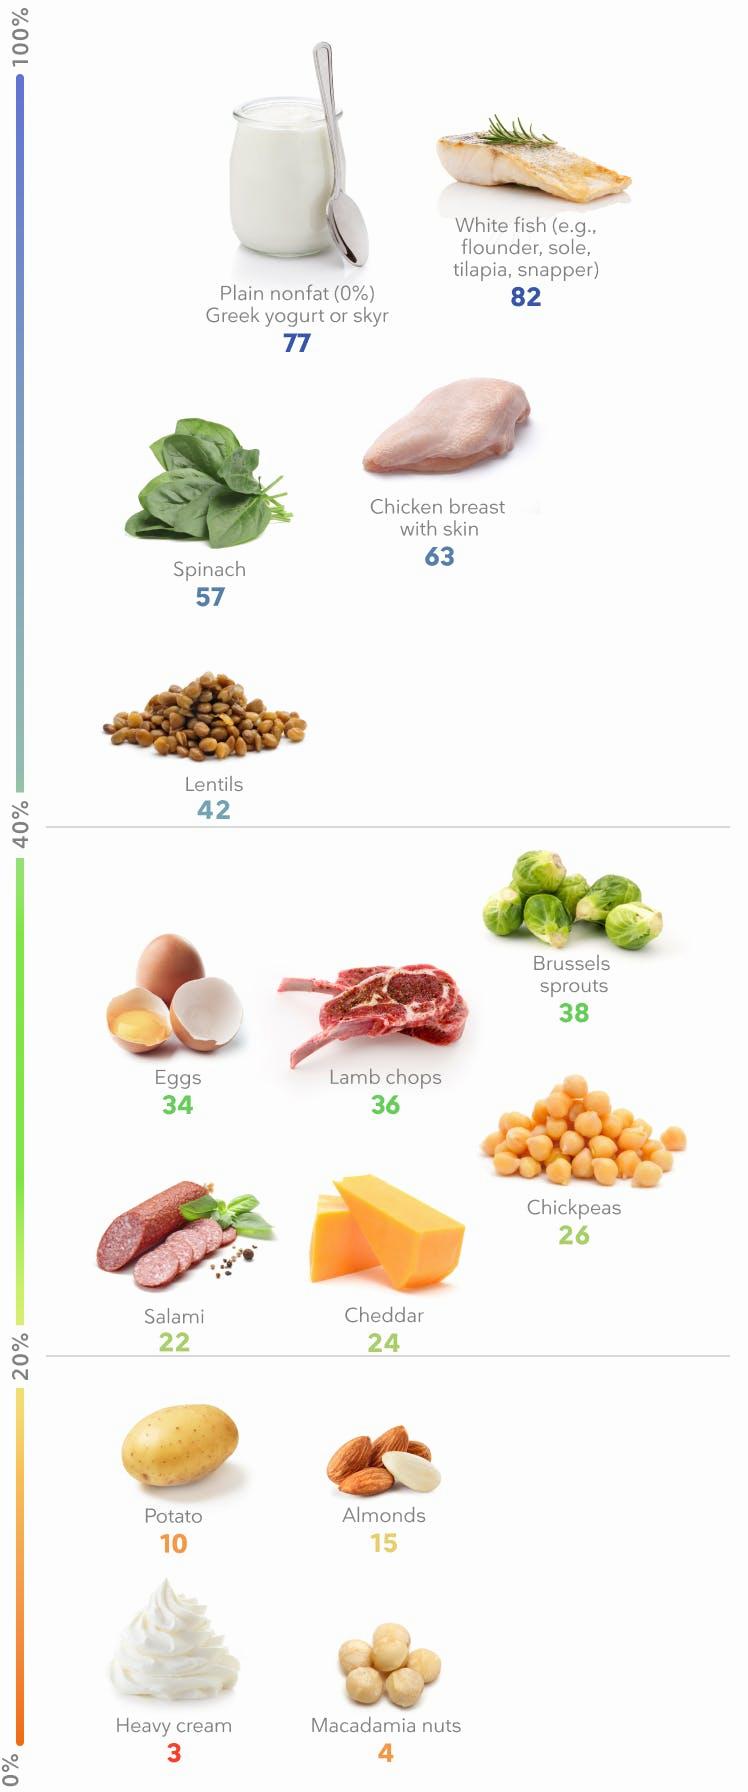 A table of common foods and their protein content per 100g.